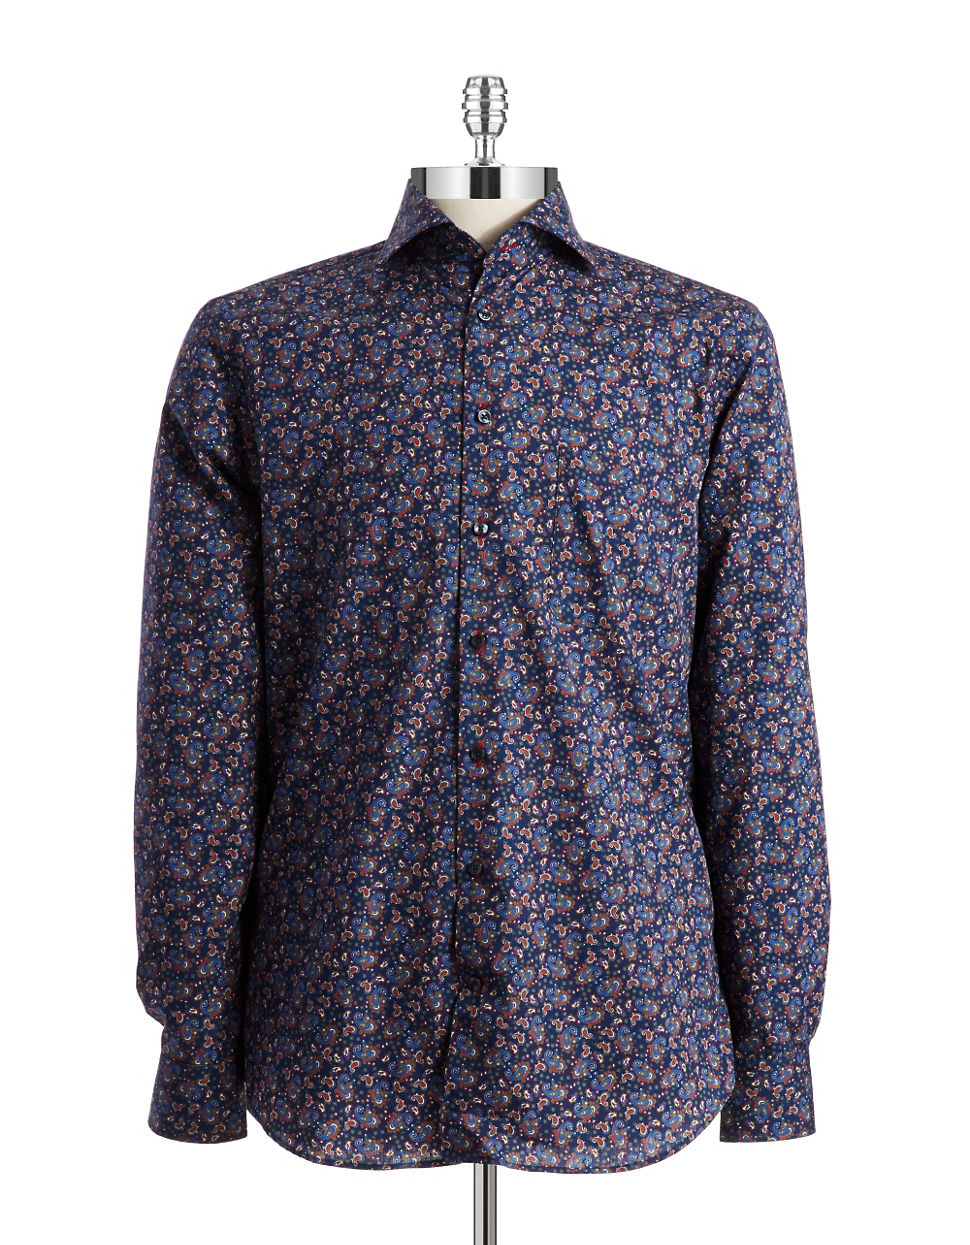 Lyst - Bugatti Classic Fit Paisley Sports Shirt in Blue for Men